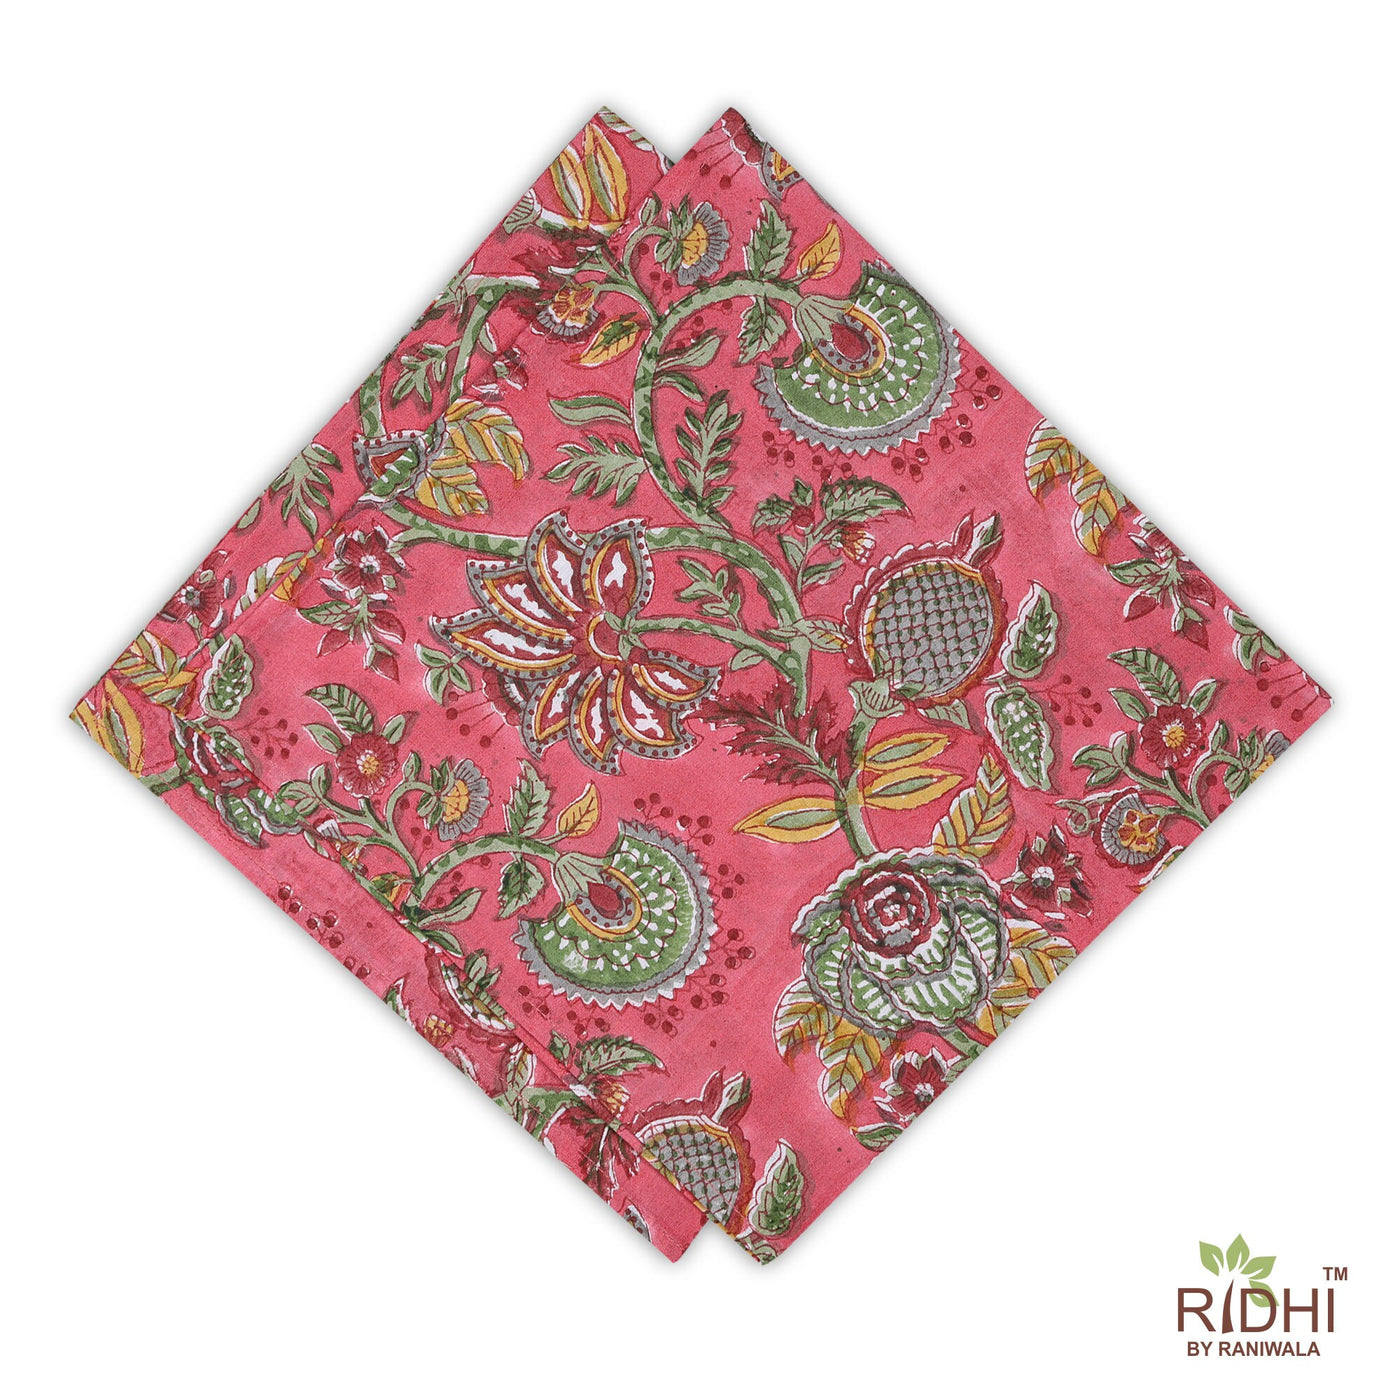 Thulian Pink, Fern Green, Tuscan Yellow Indian Hand Block Floral Printed Cotton Cloth Napkins, 18x18"- Cocktail Napkins 20x20"- Dinner Napkins